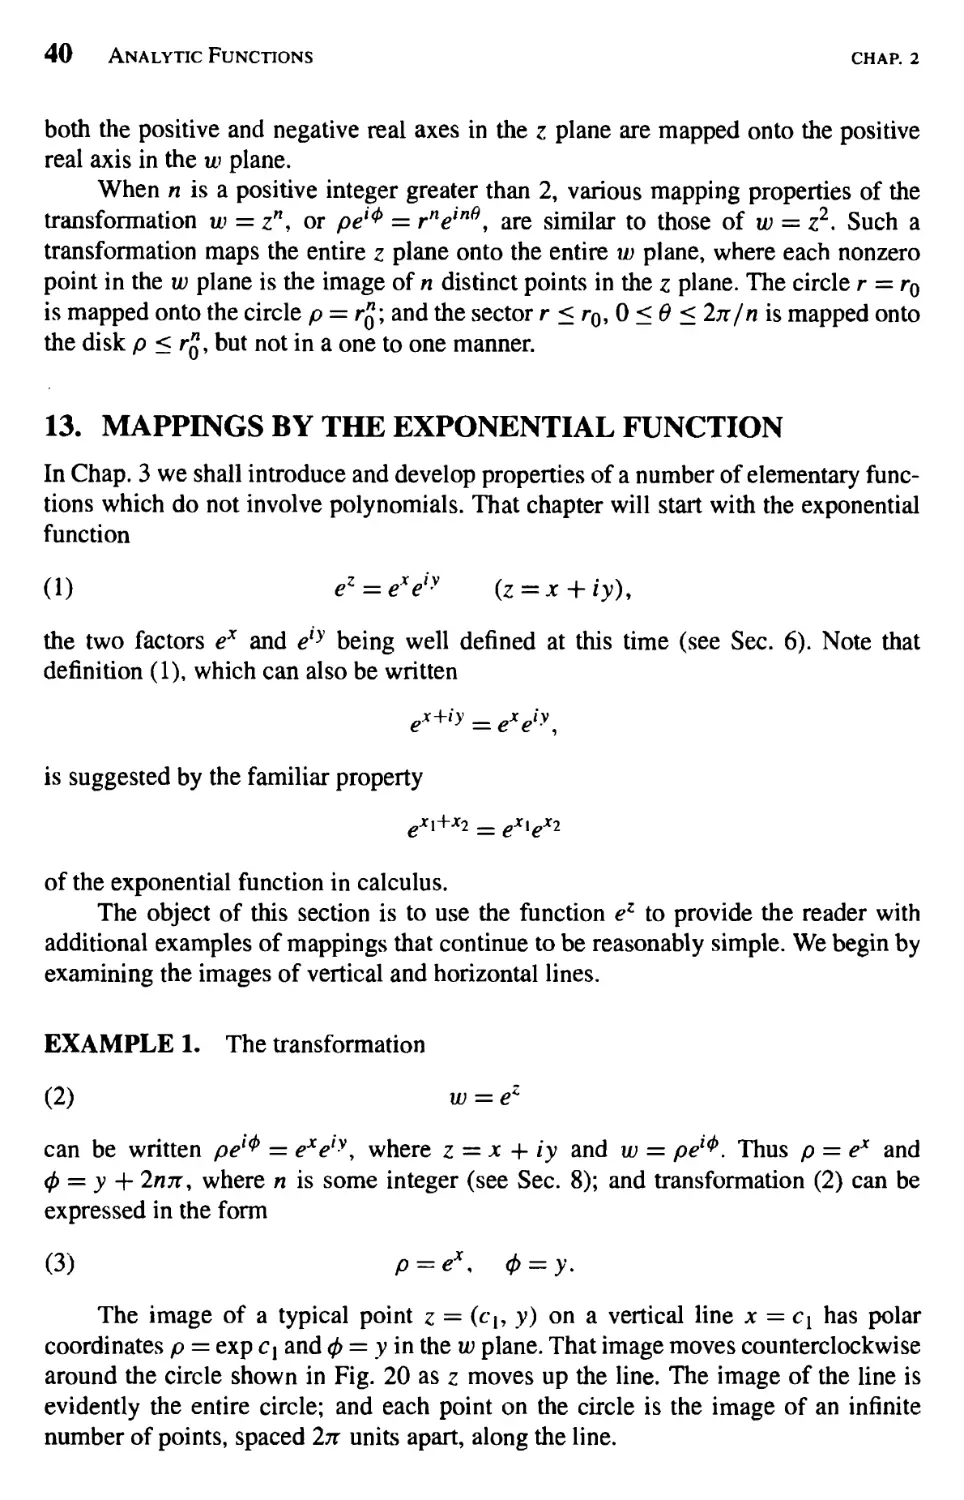 Mappings by the Exponential Function